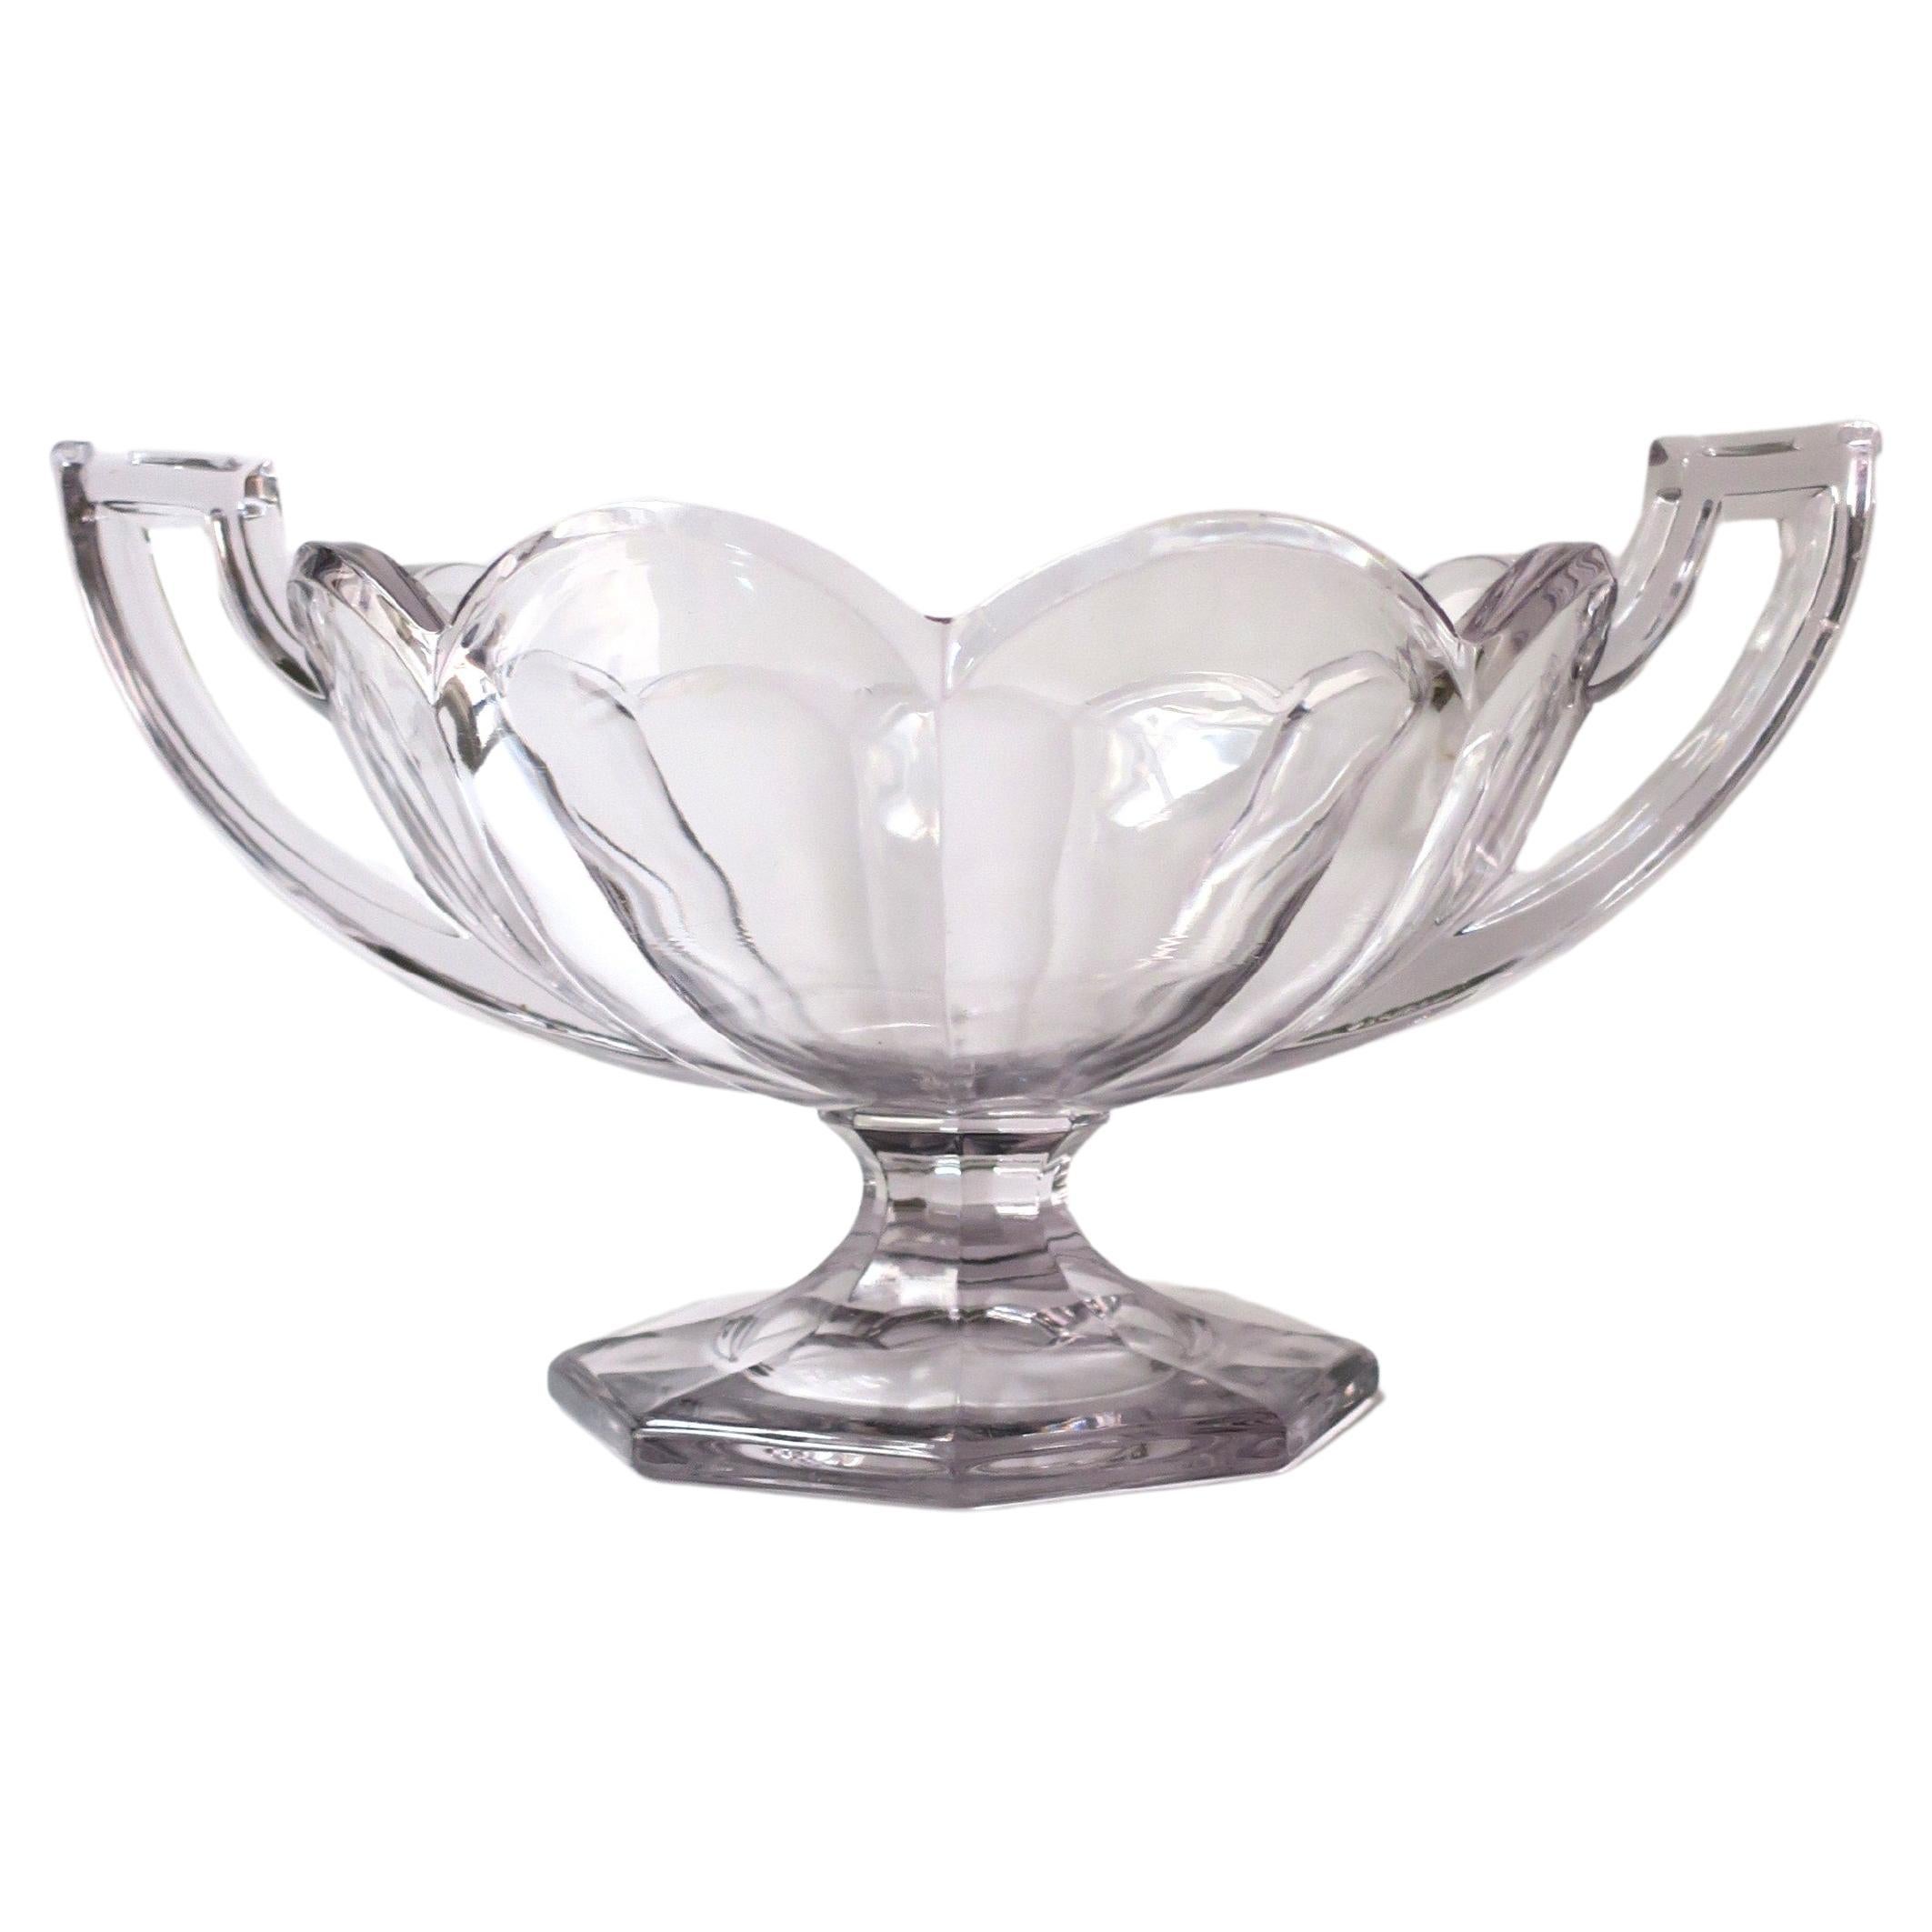 Glass Urn with Scalloped Edge For Sale